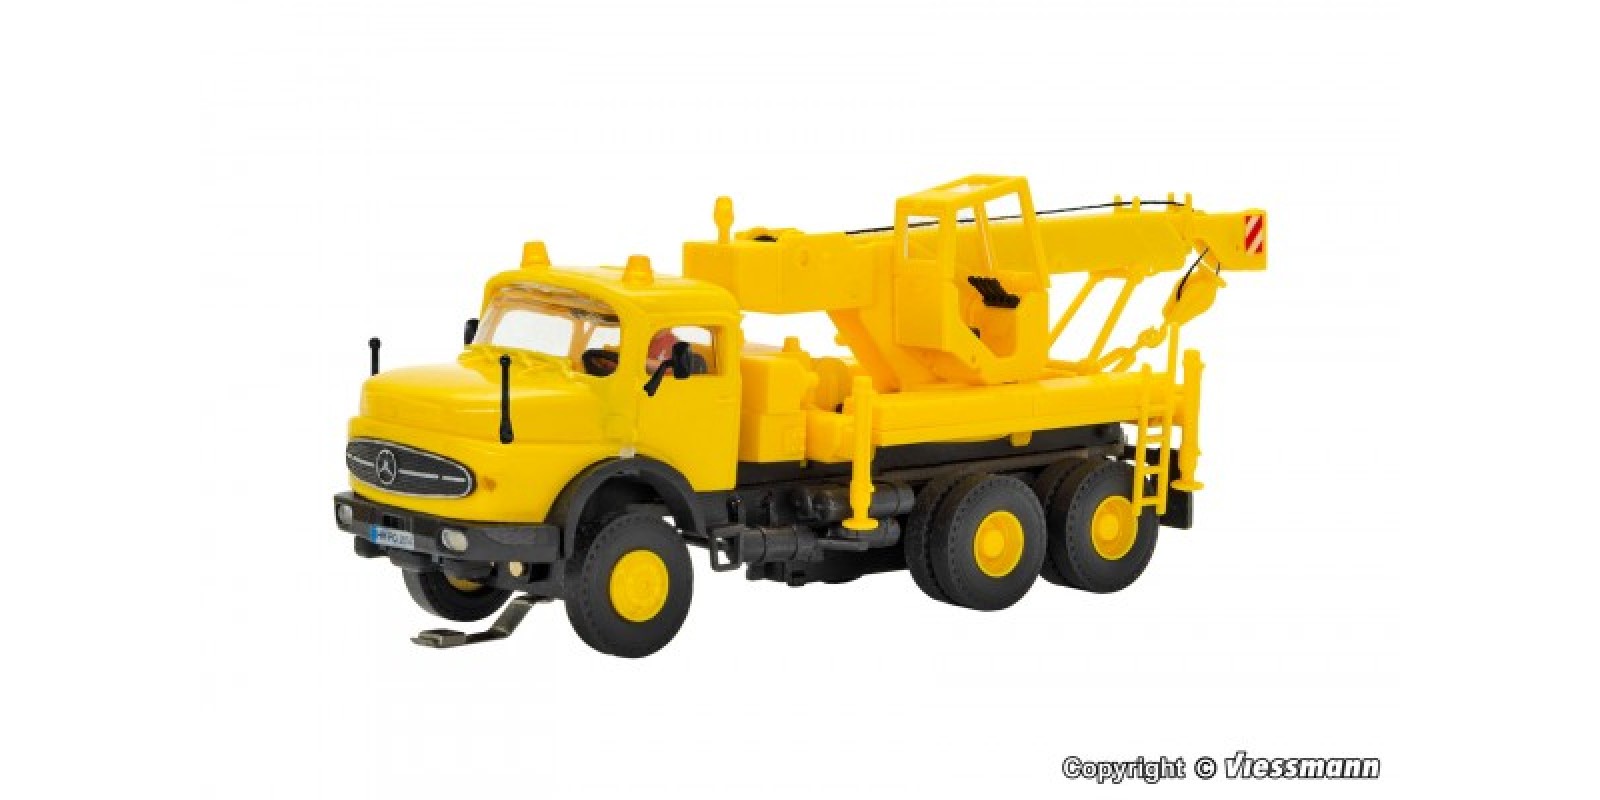 VI8022 H0 MB round bonnet 3-axle recovery crane with rotating flashing lights, basic, functional model